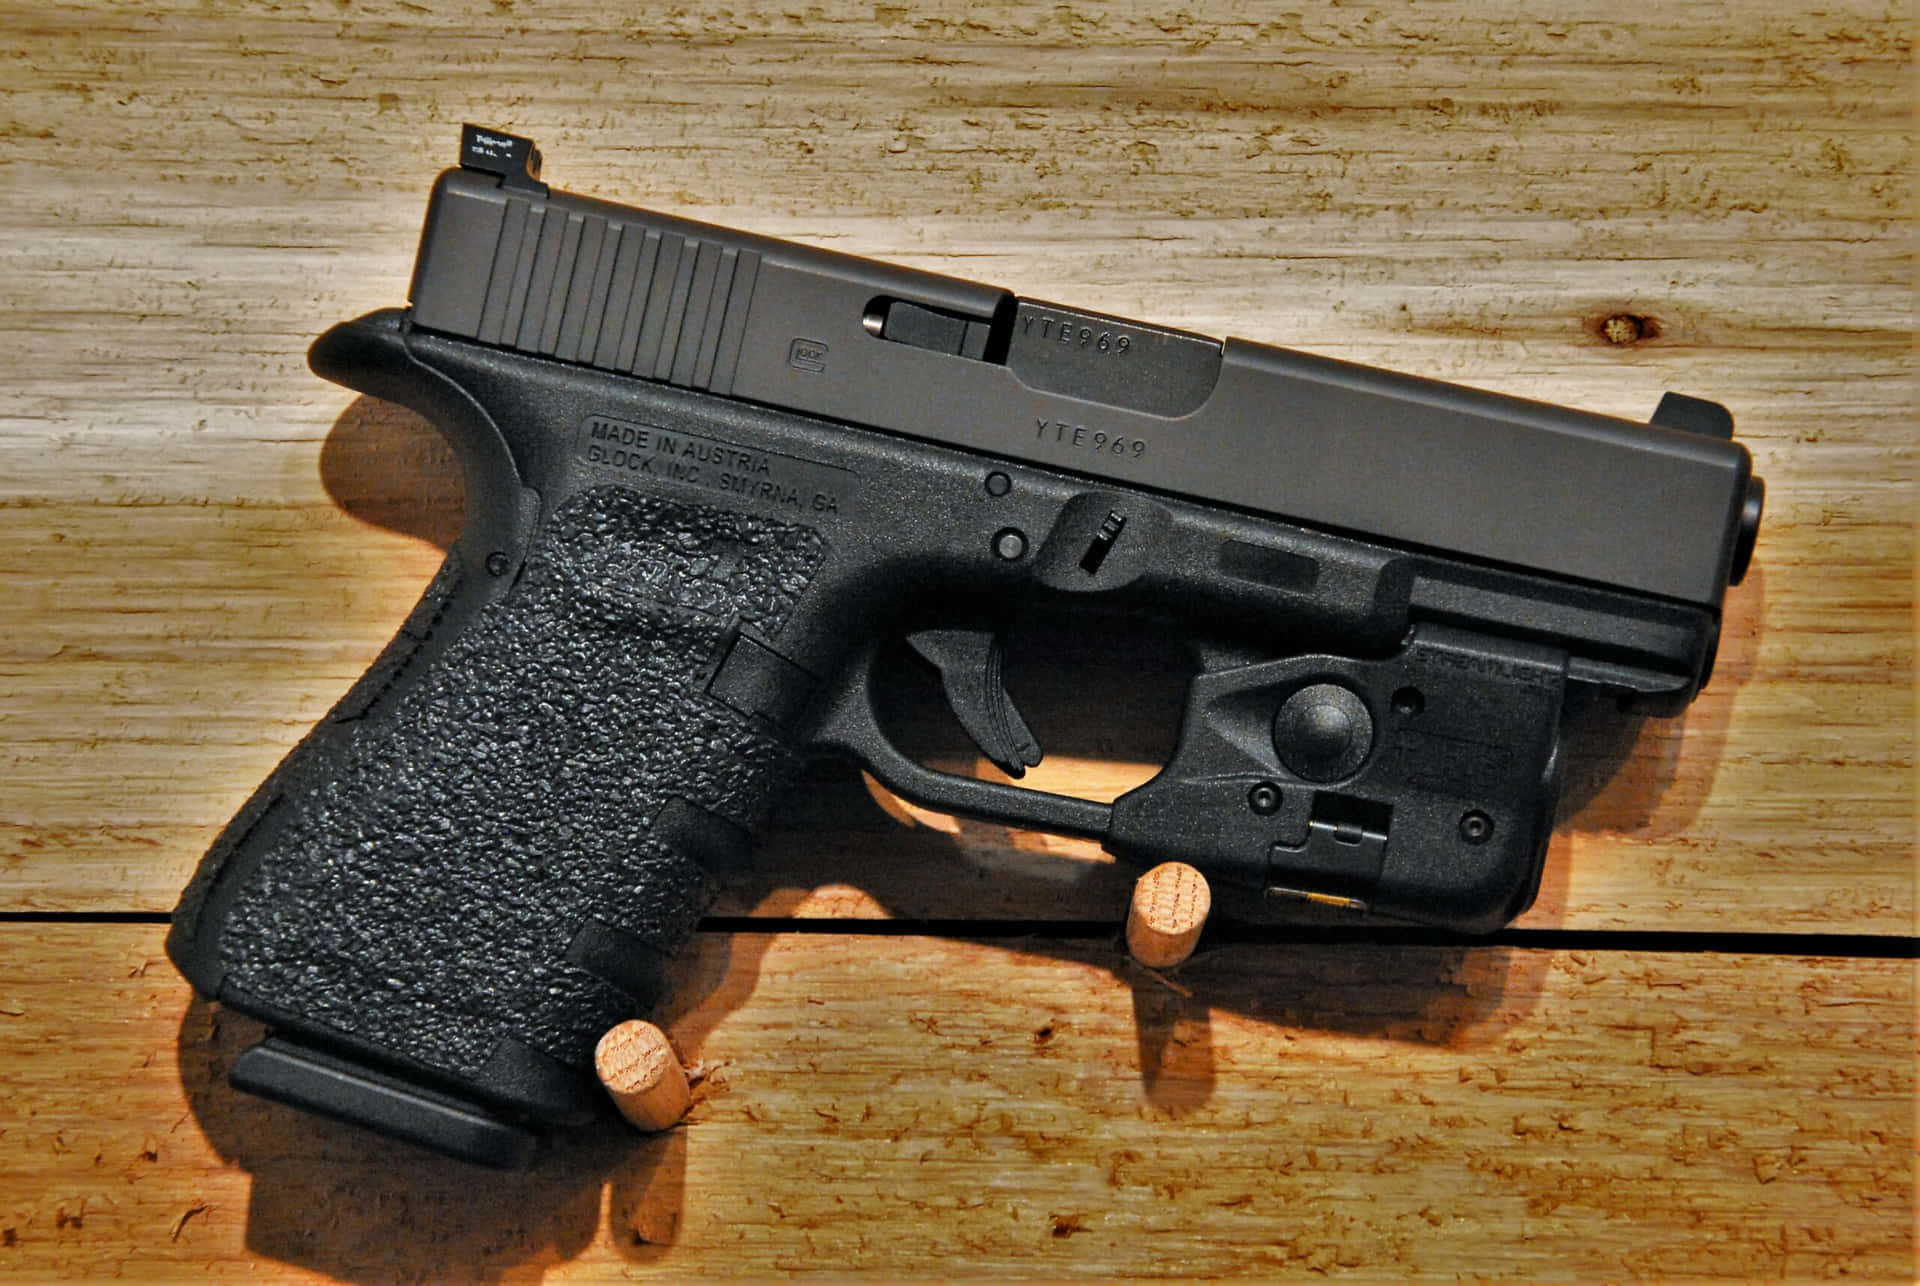 The slim design of the Glock 19 makes it the perfect handgun for concealed carry.